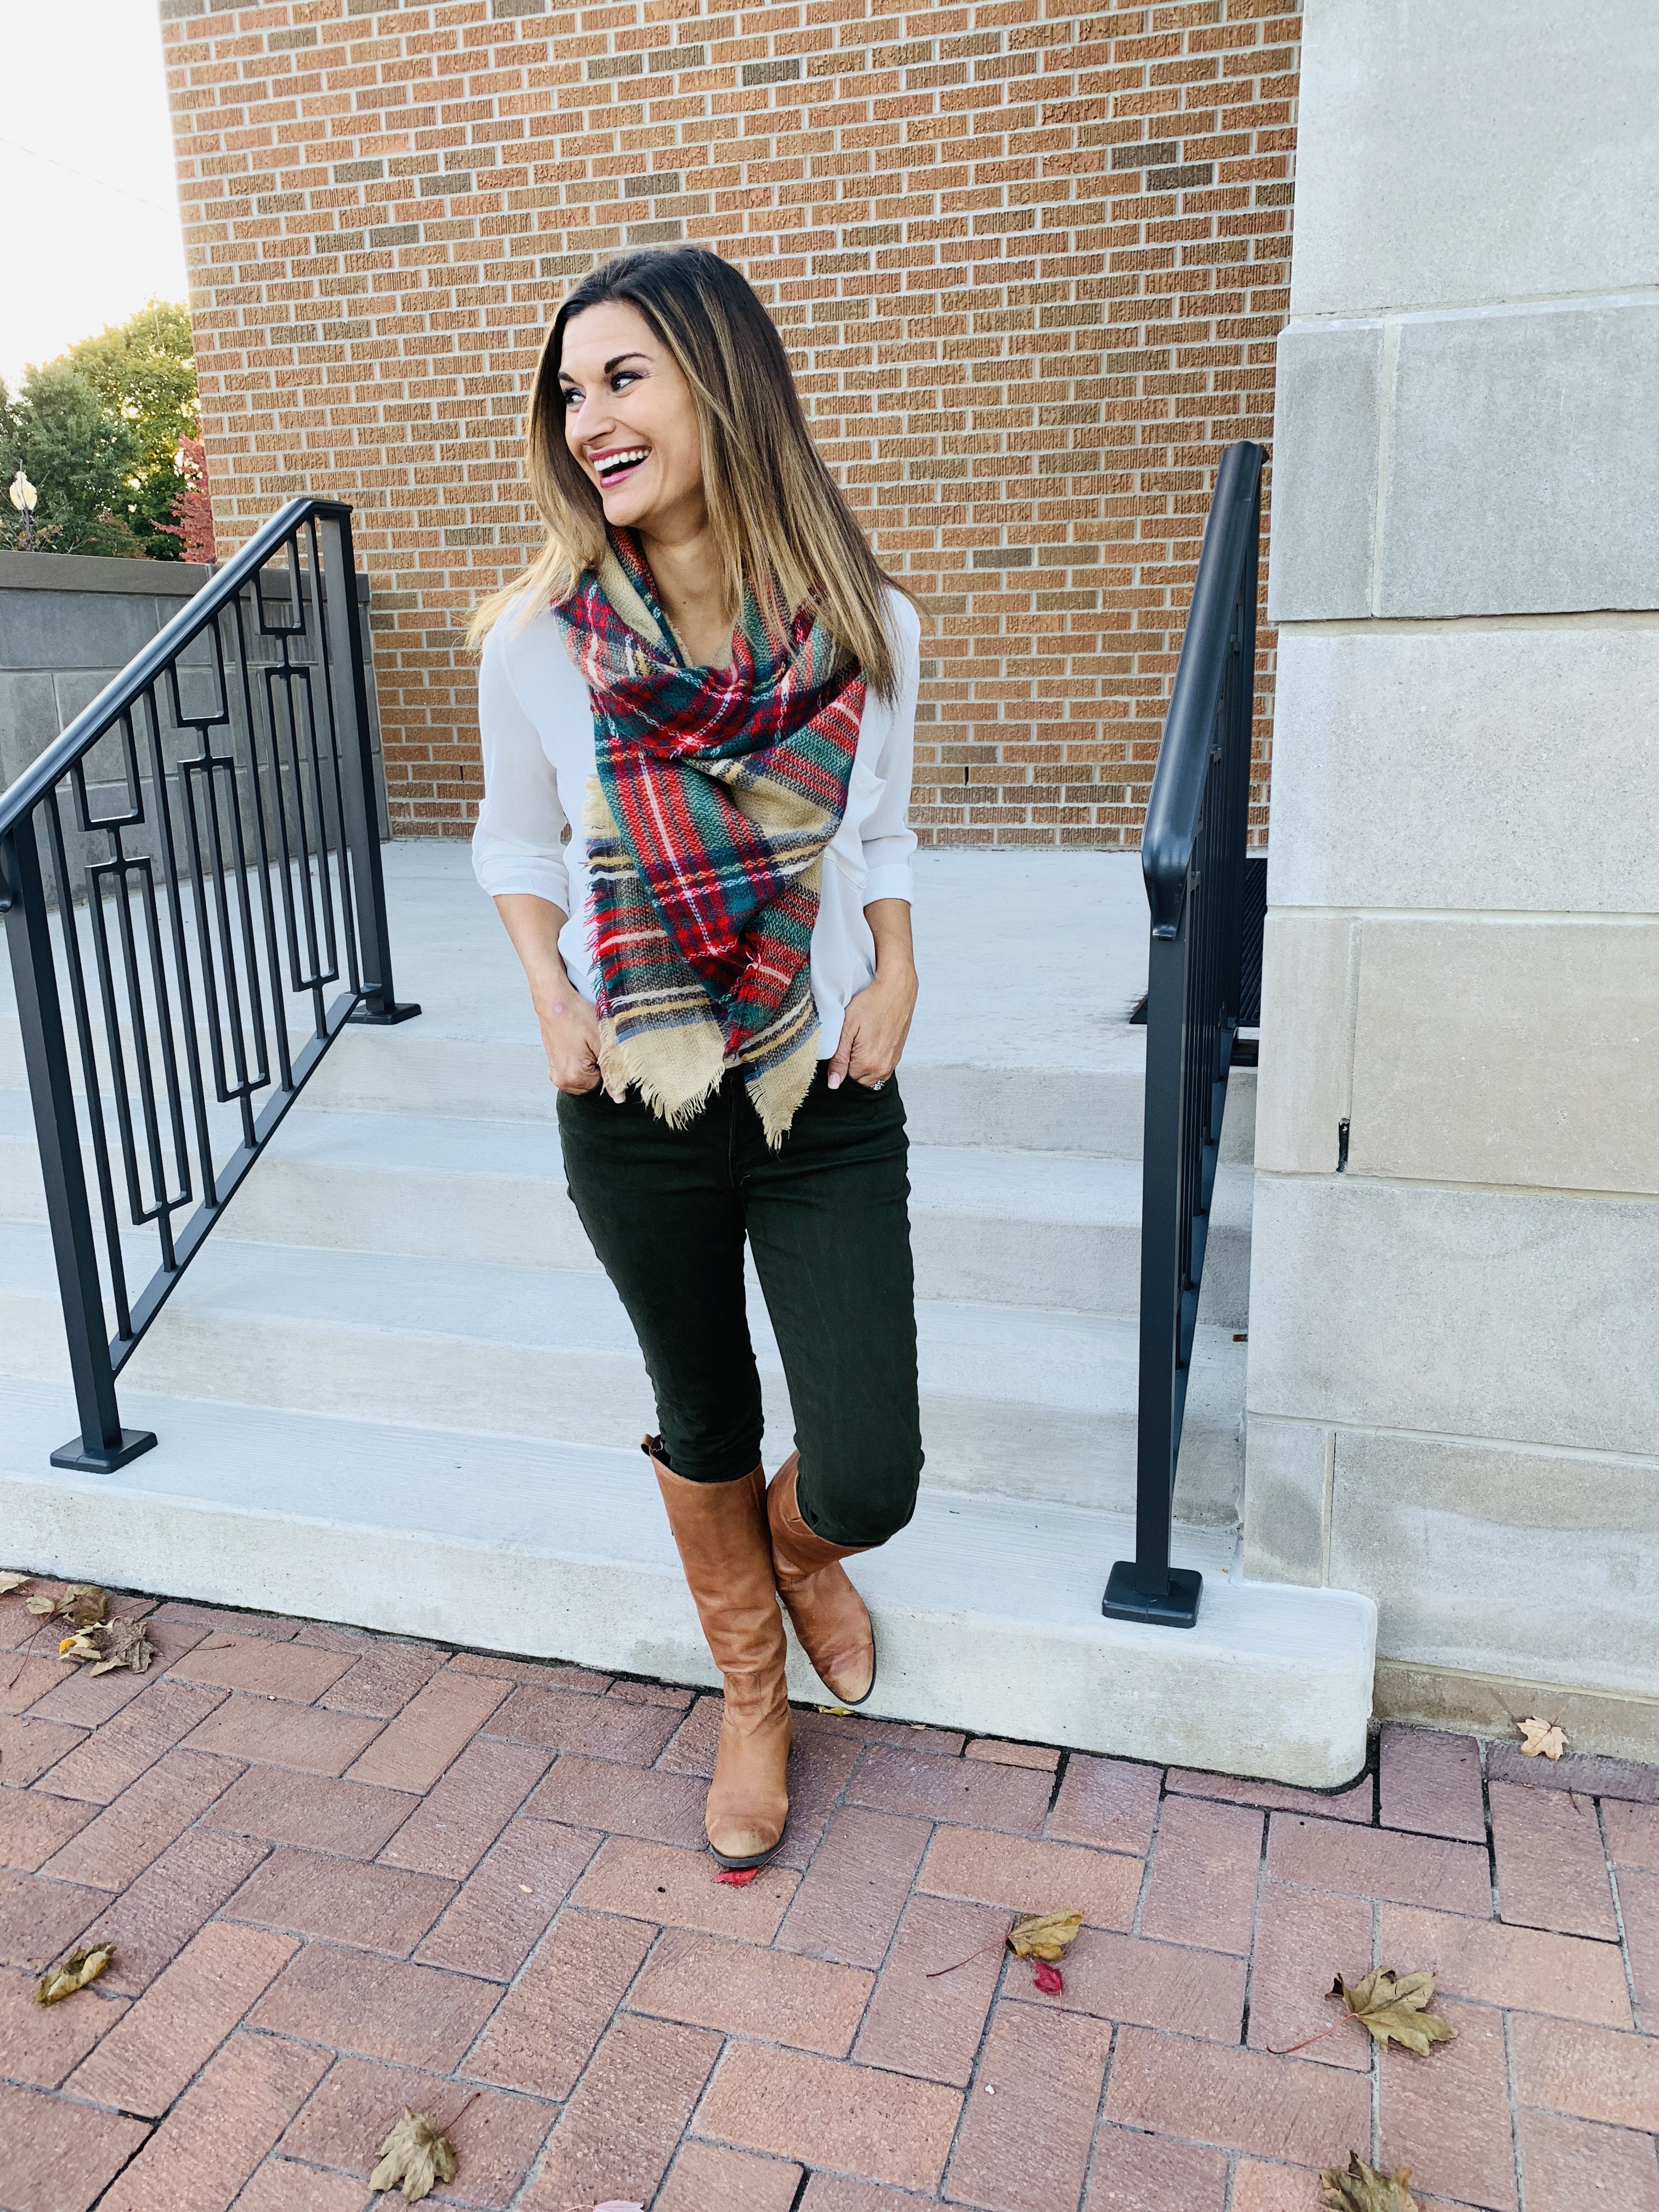 How to Wear 1 Tunic 10 Ways – Just Posted